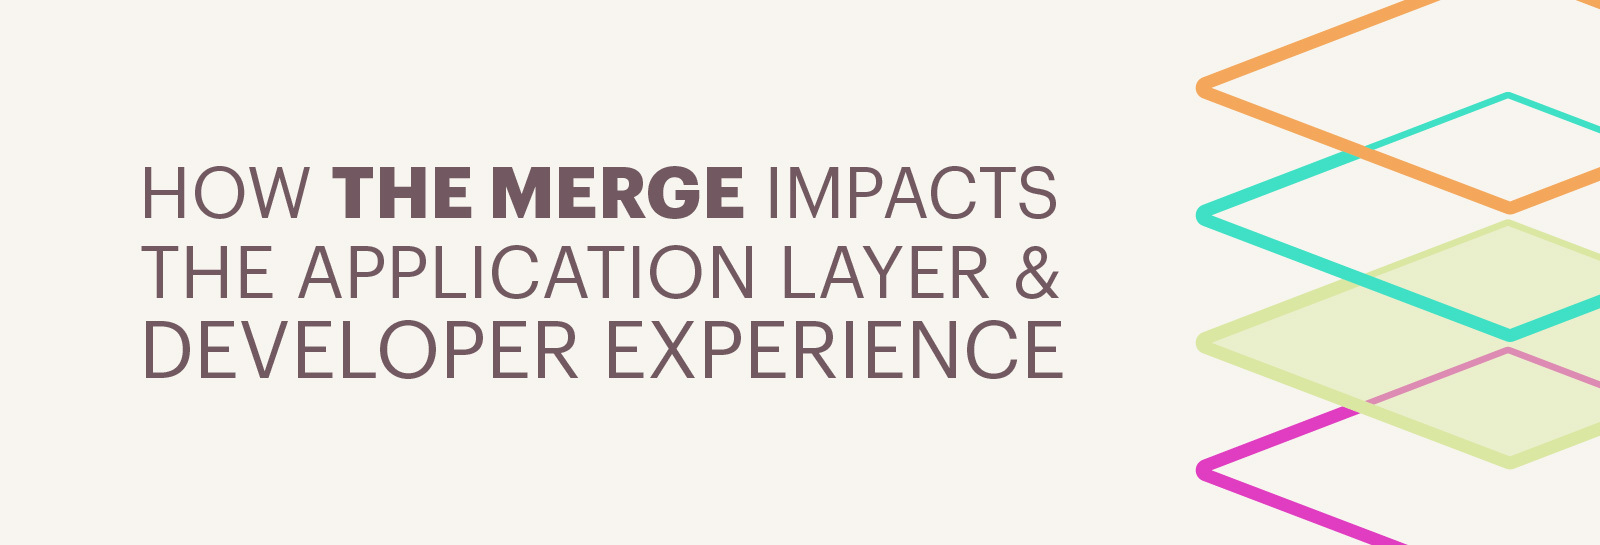 How the merge impacts the application layer and developer experience